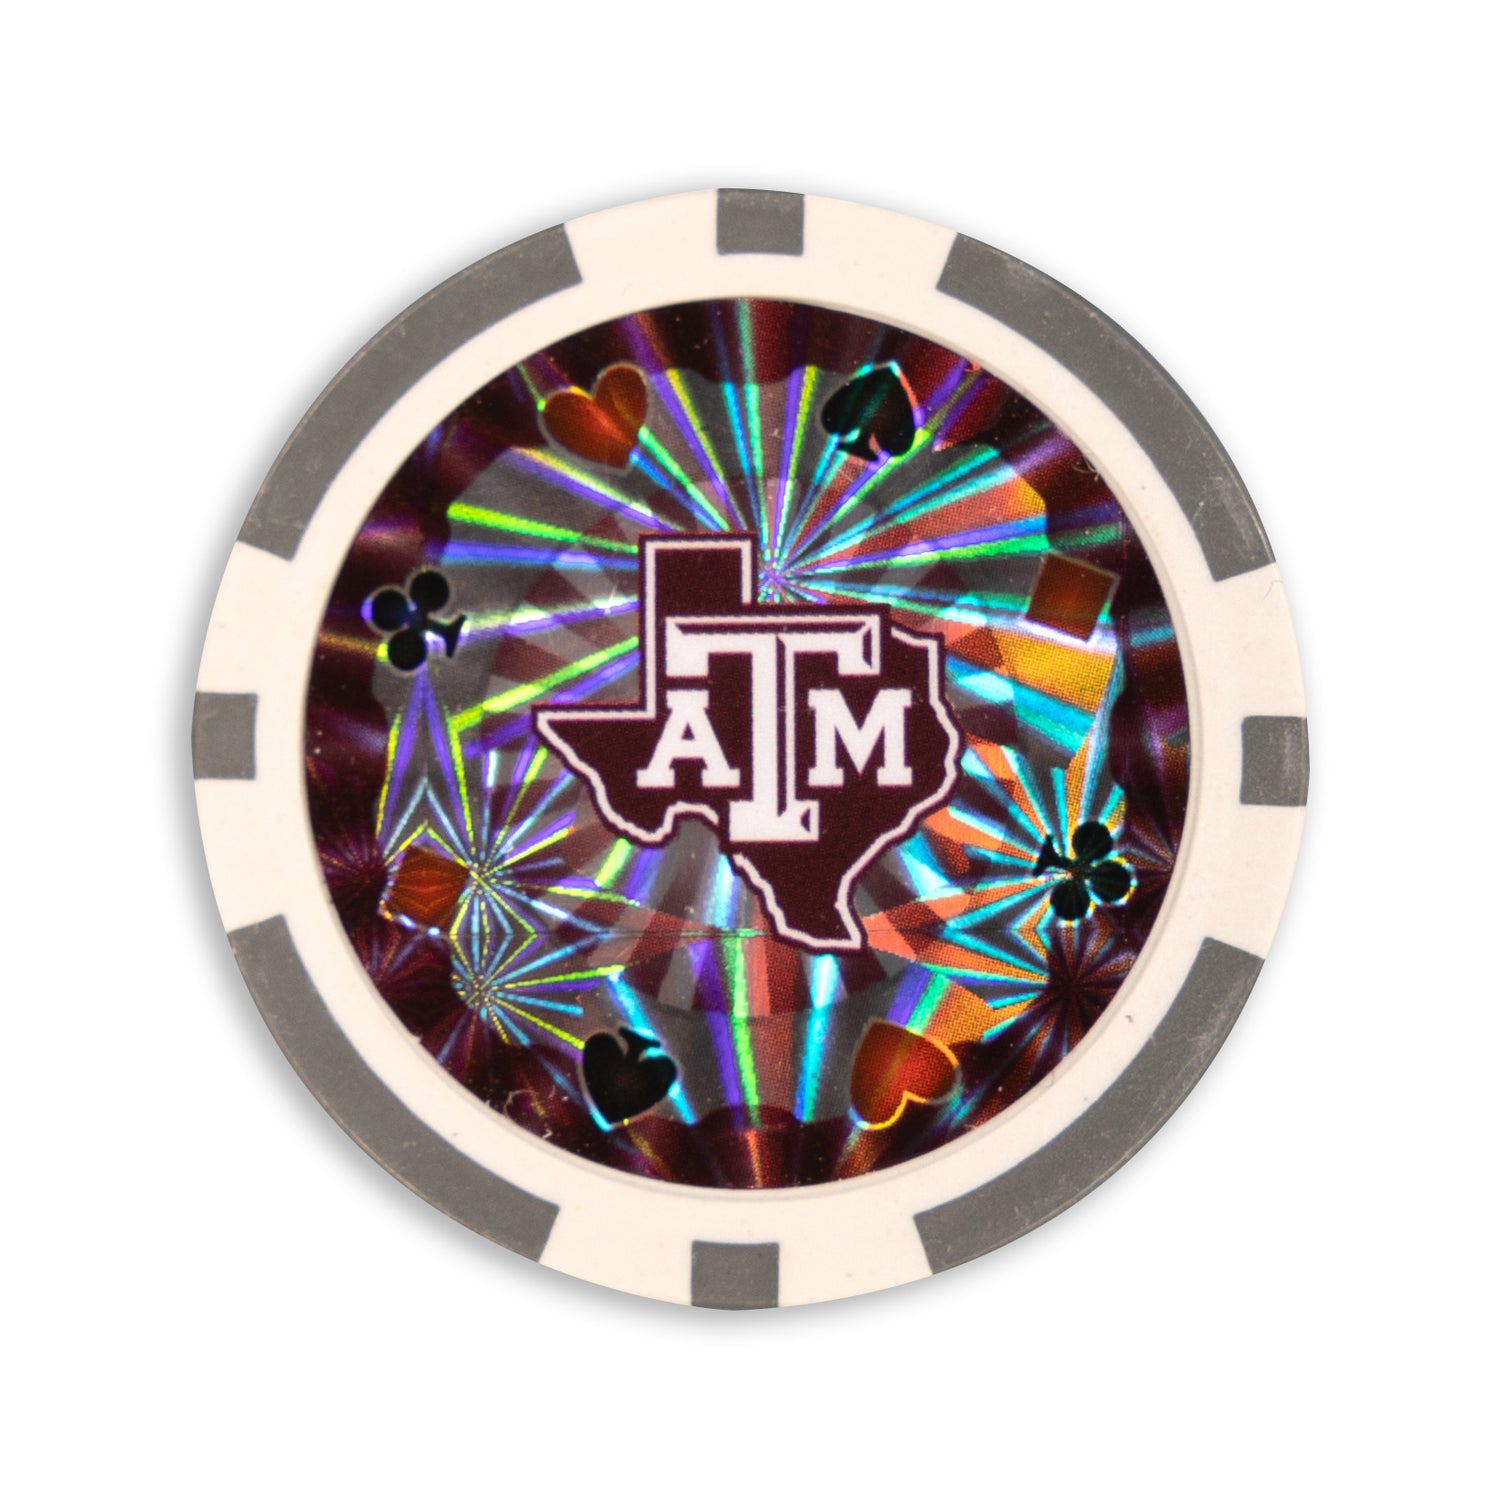 Texas A&M Silver Poker Chips 20 Ct